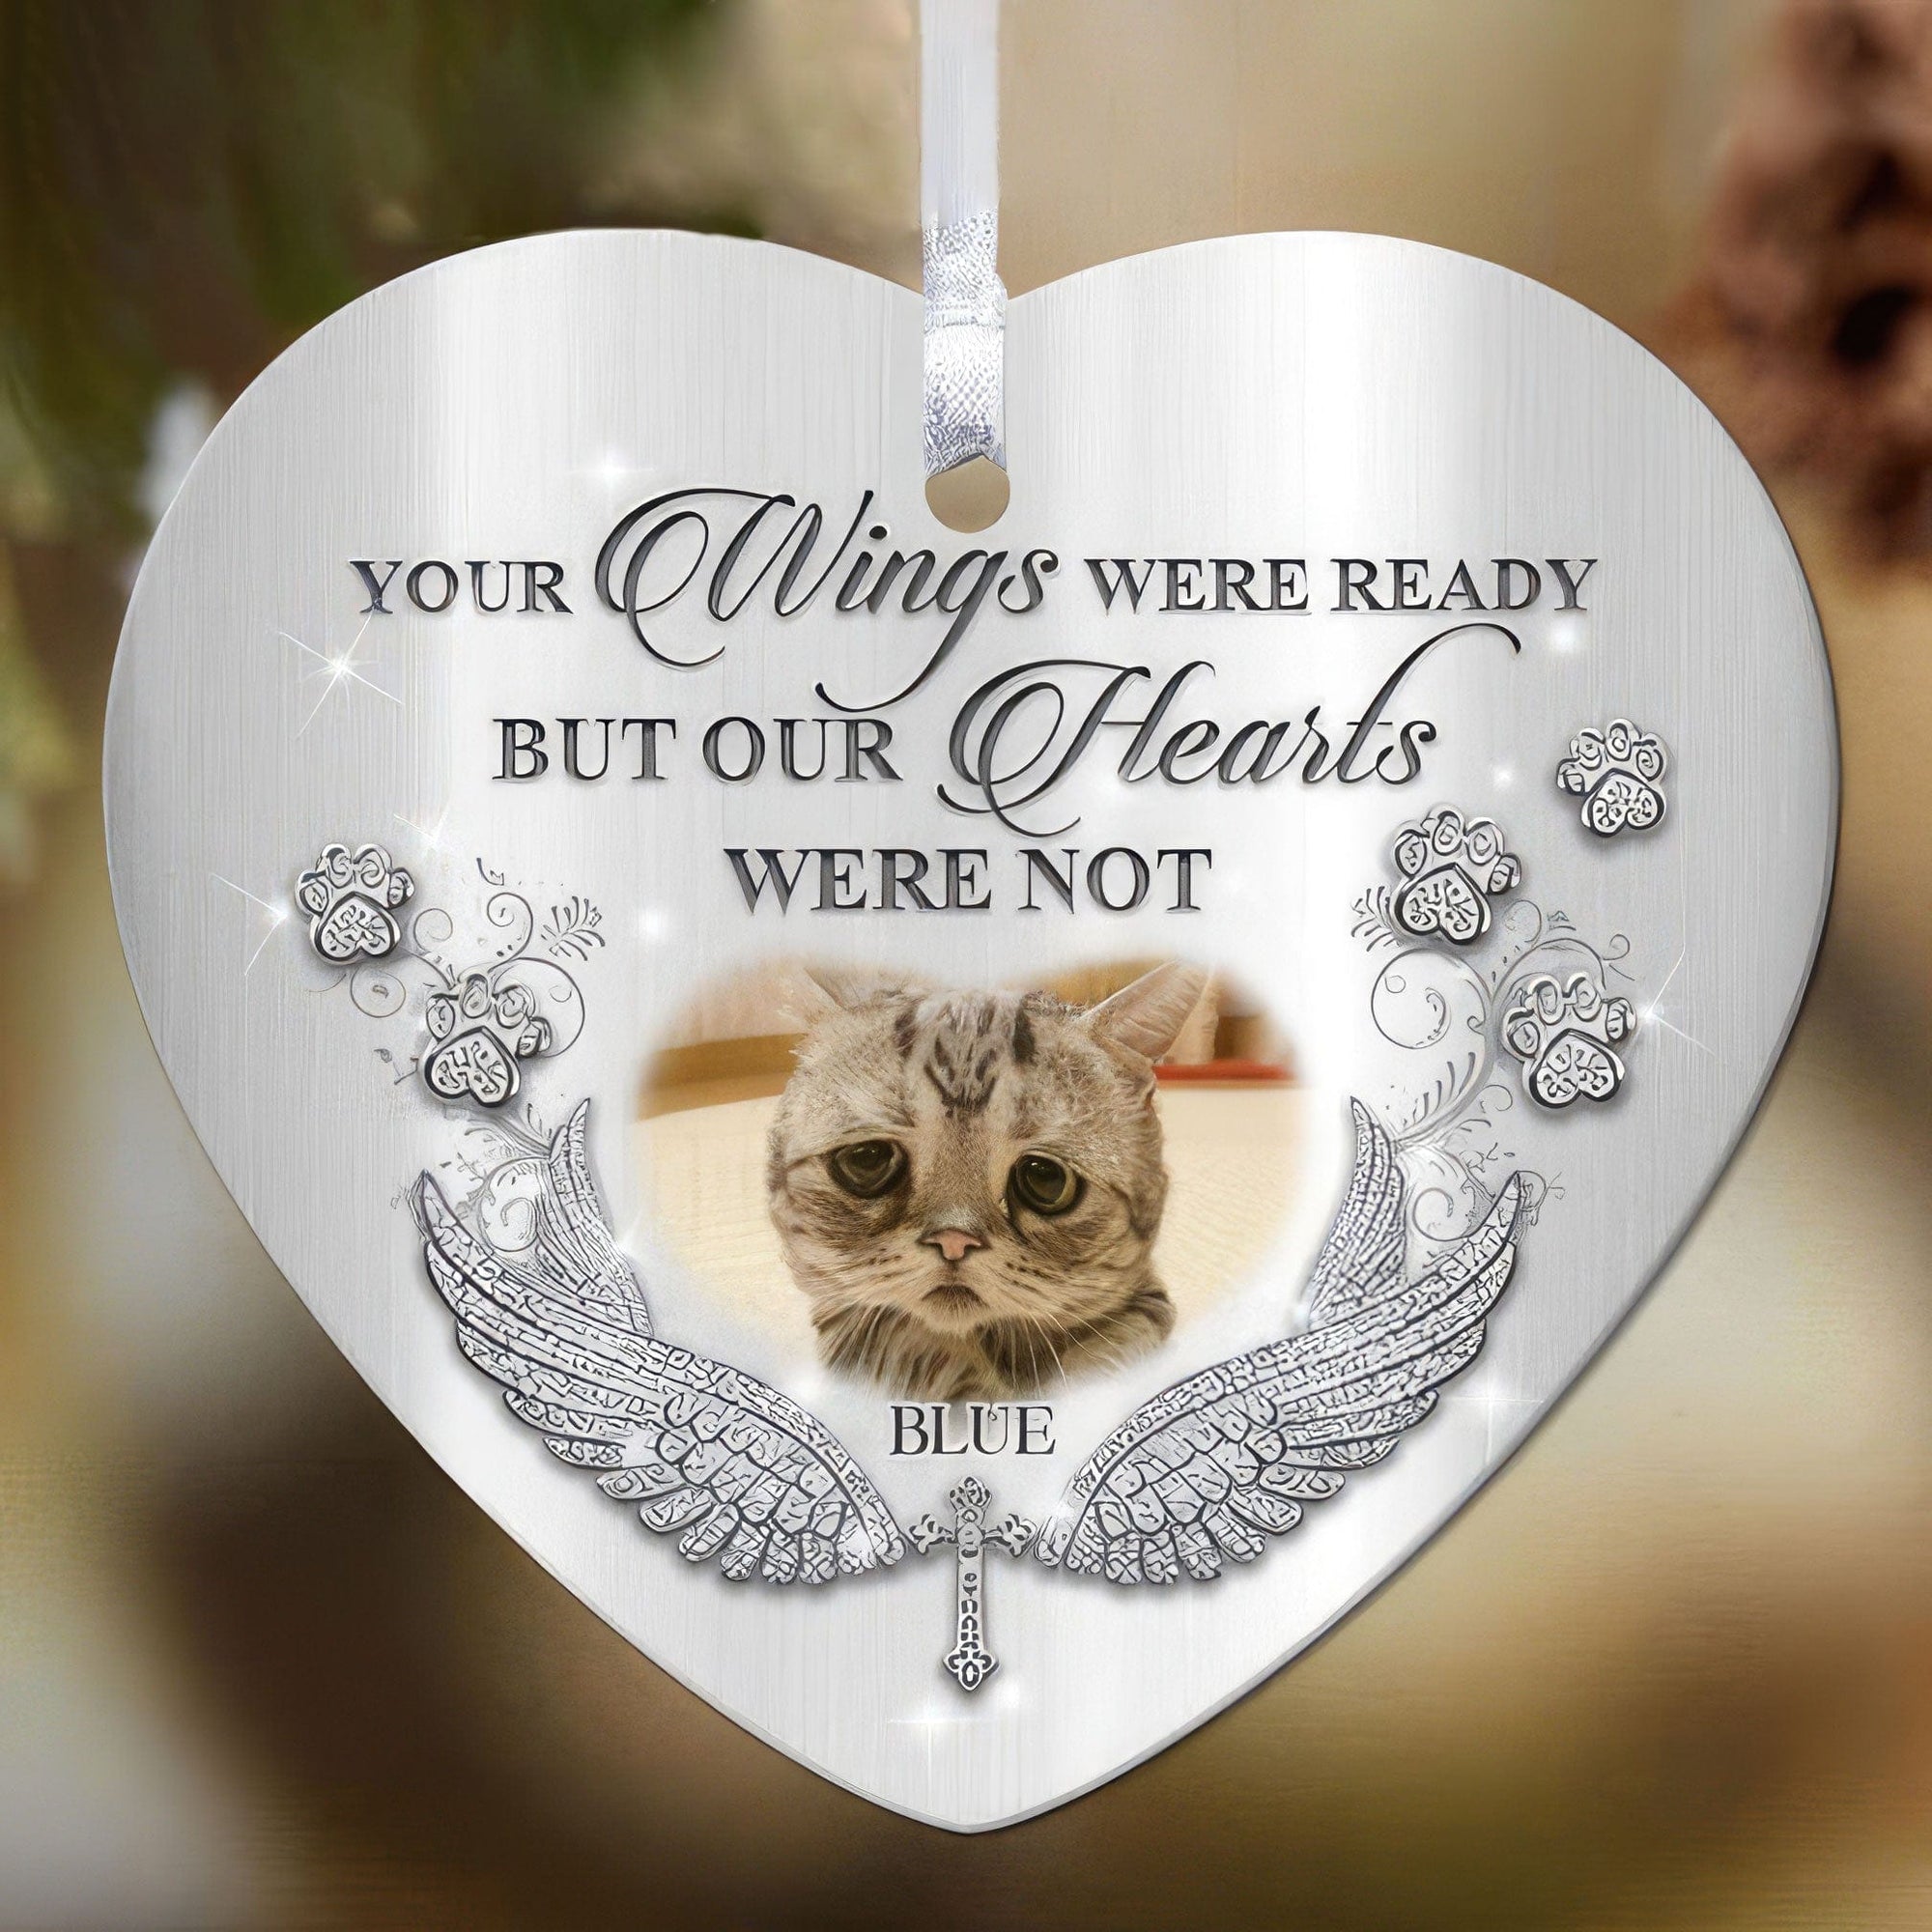 GeckoCustom I'll Hold You In My Heart Pet Heart Ornament, Custom Quotes & Photo Ornament HN590 Pack 1 Heart